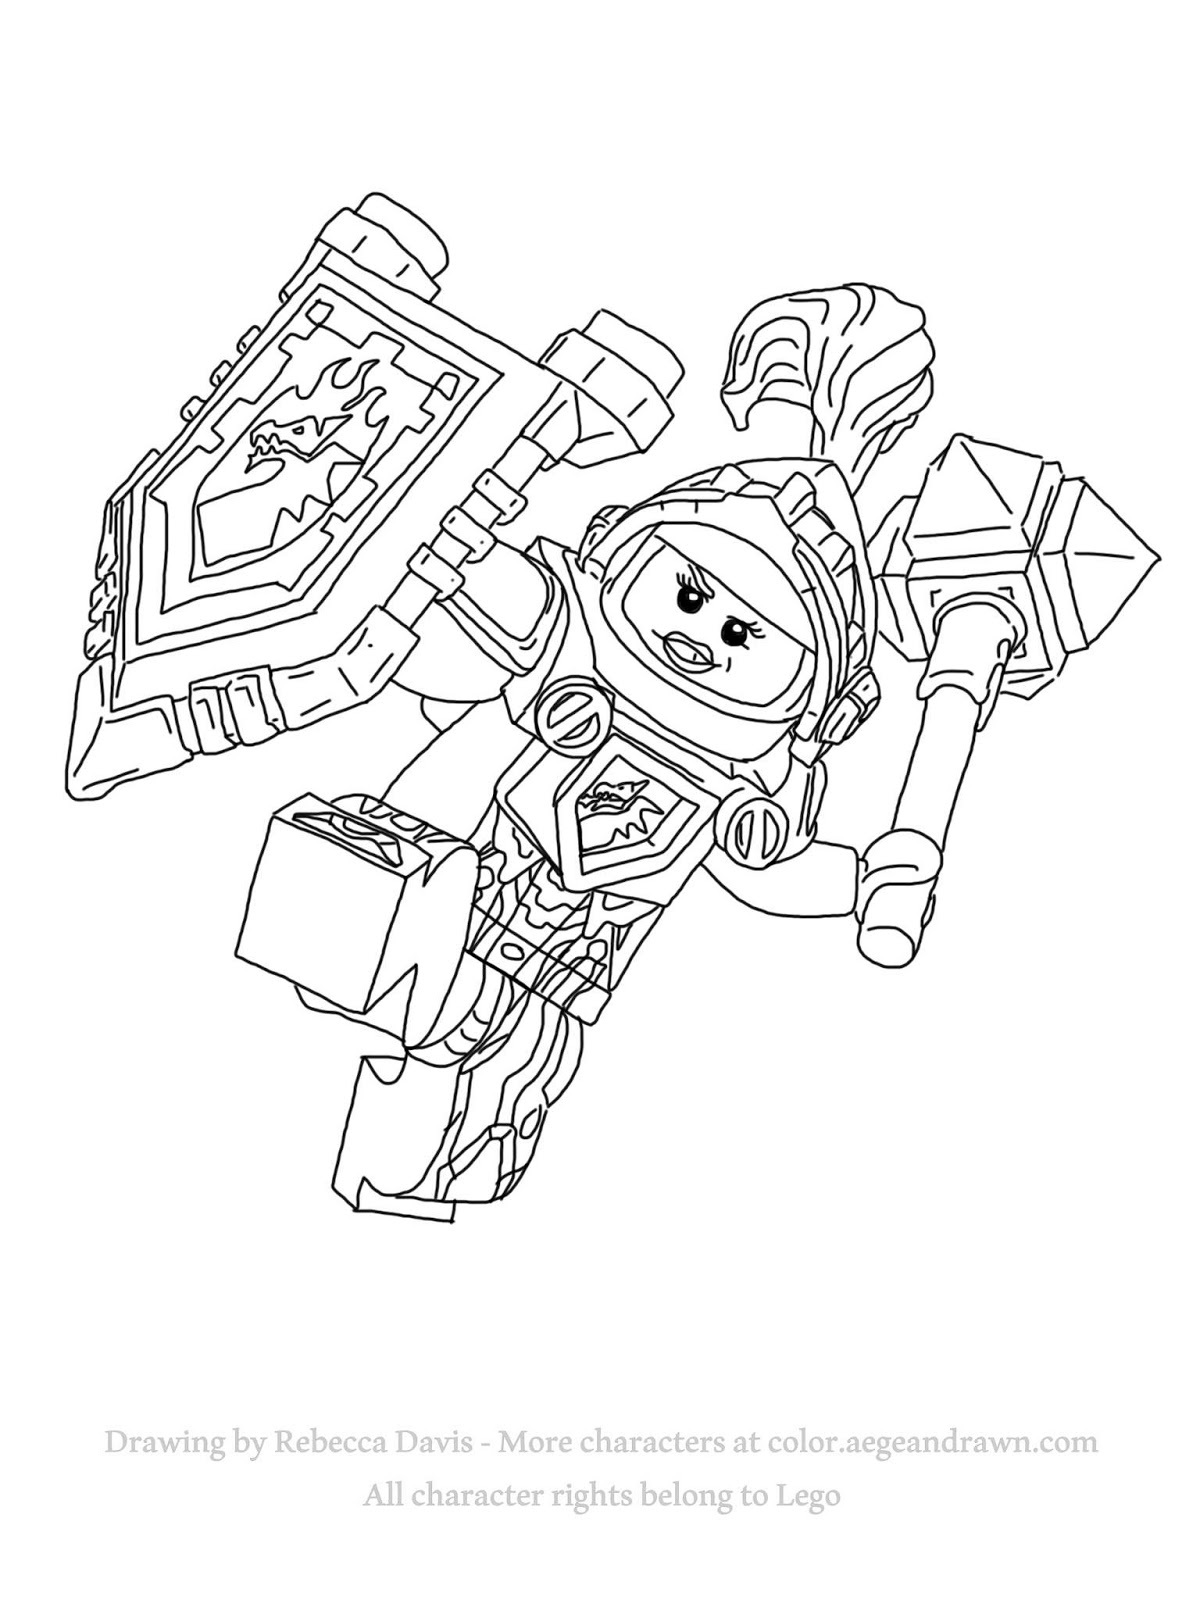 Nexo Knight Coloring Page – iconmaker.info